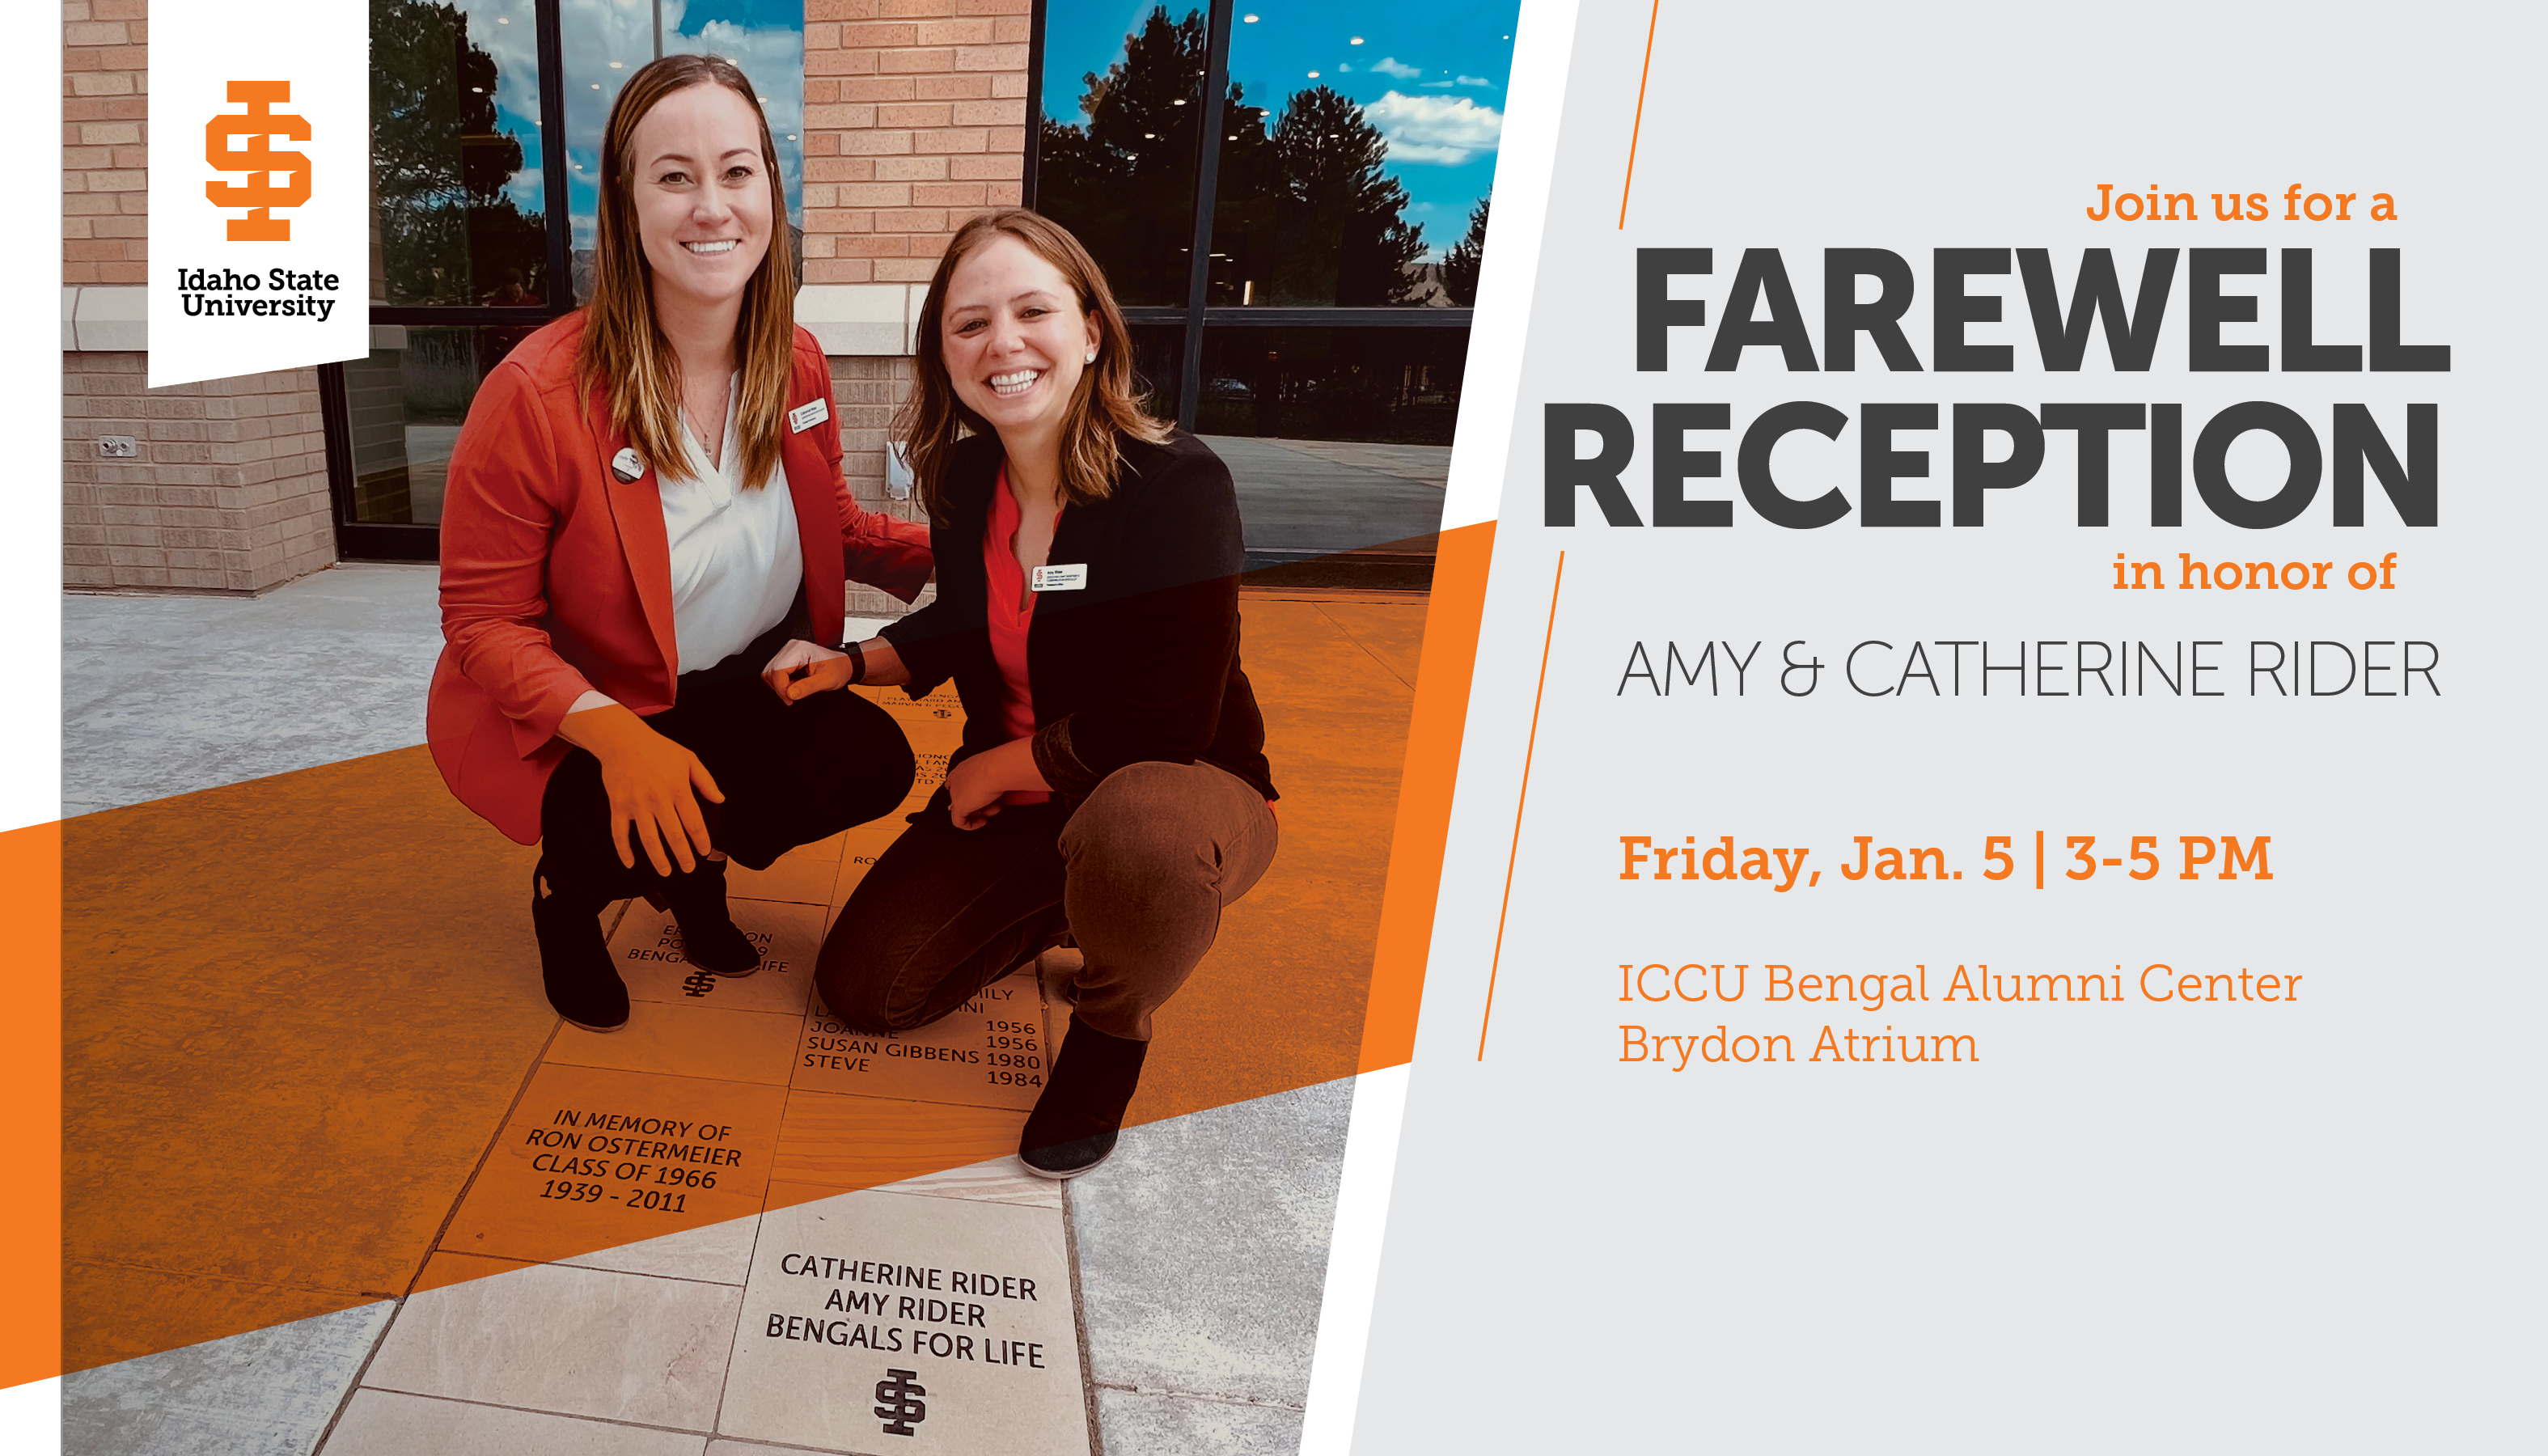 Farewell reception for Catherine and Amy Rider January 5 from 3 to 5 pm at the ICCU Bengal Alumni Center